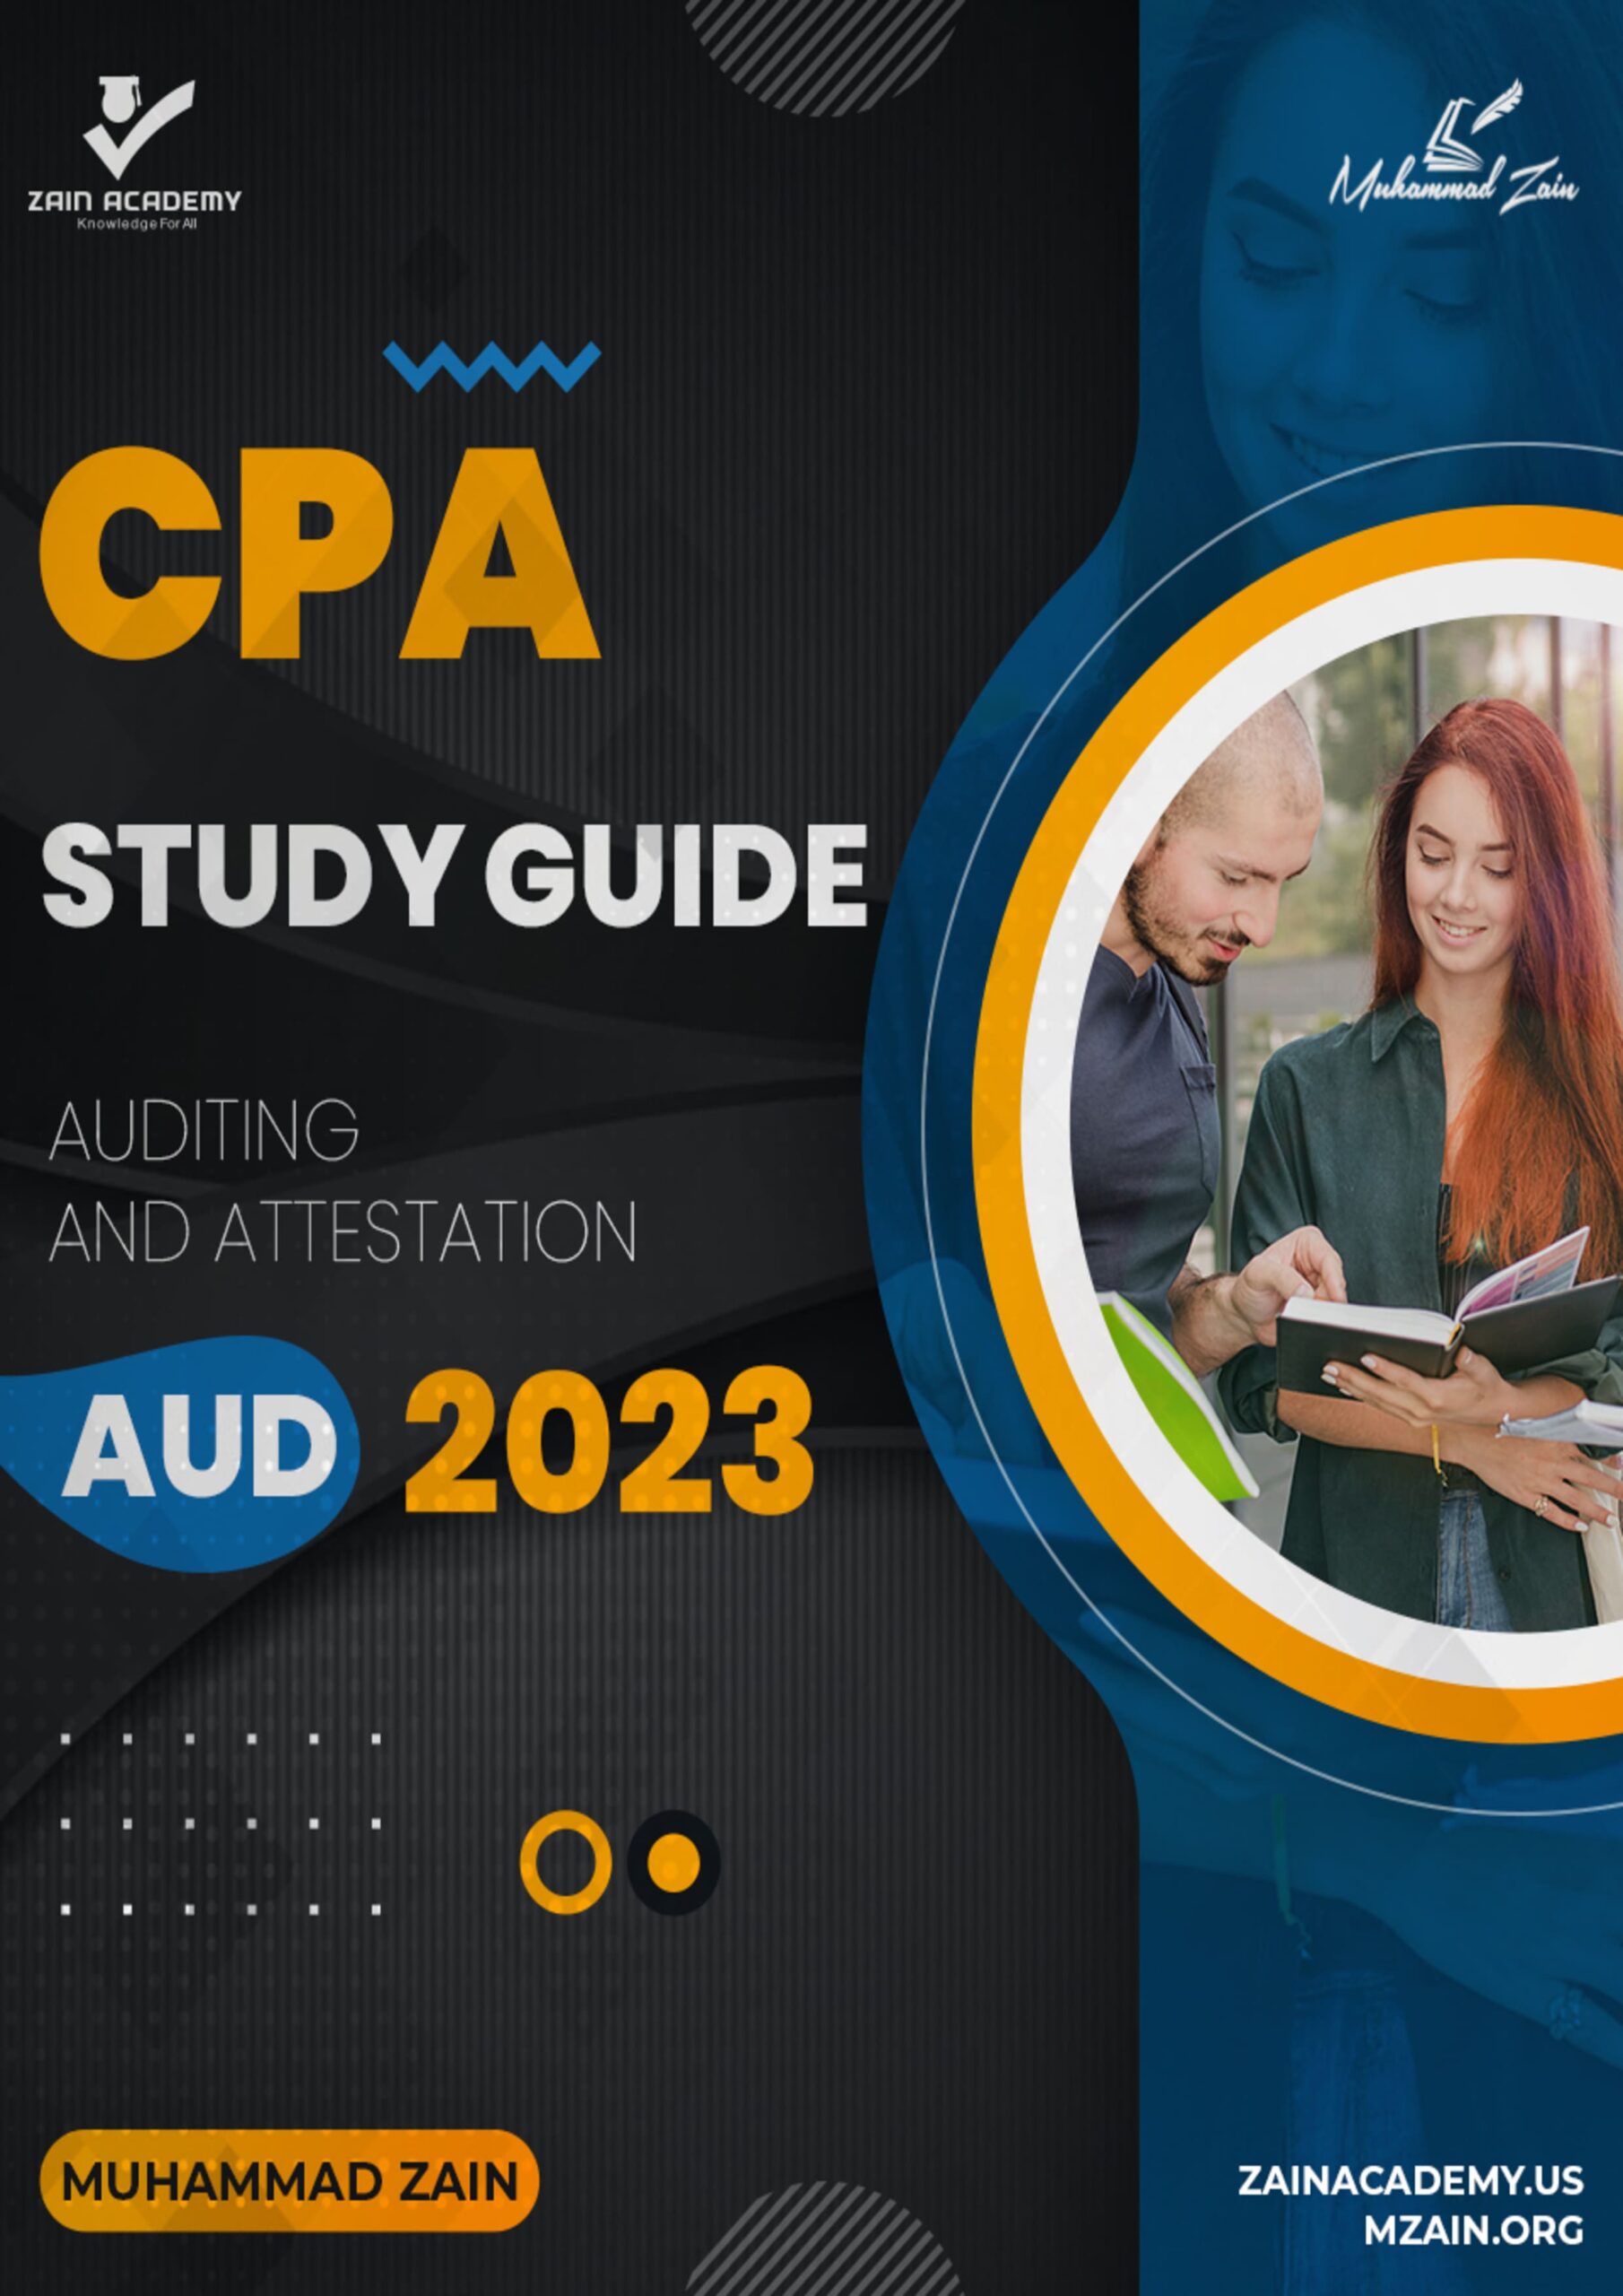 certified public accountant (cpa) study guide auditing and attestation (aud) 2023